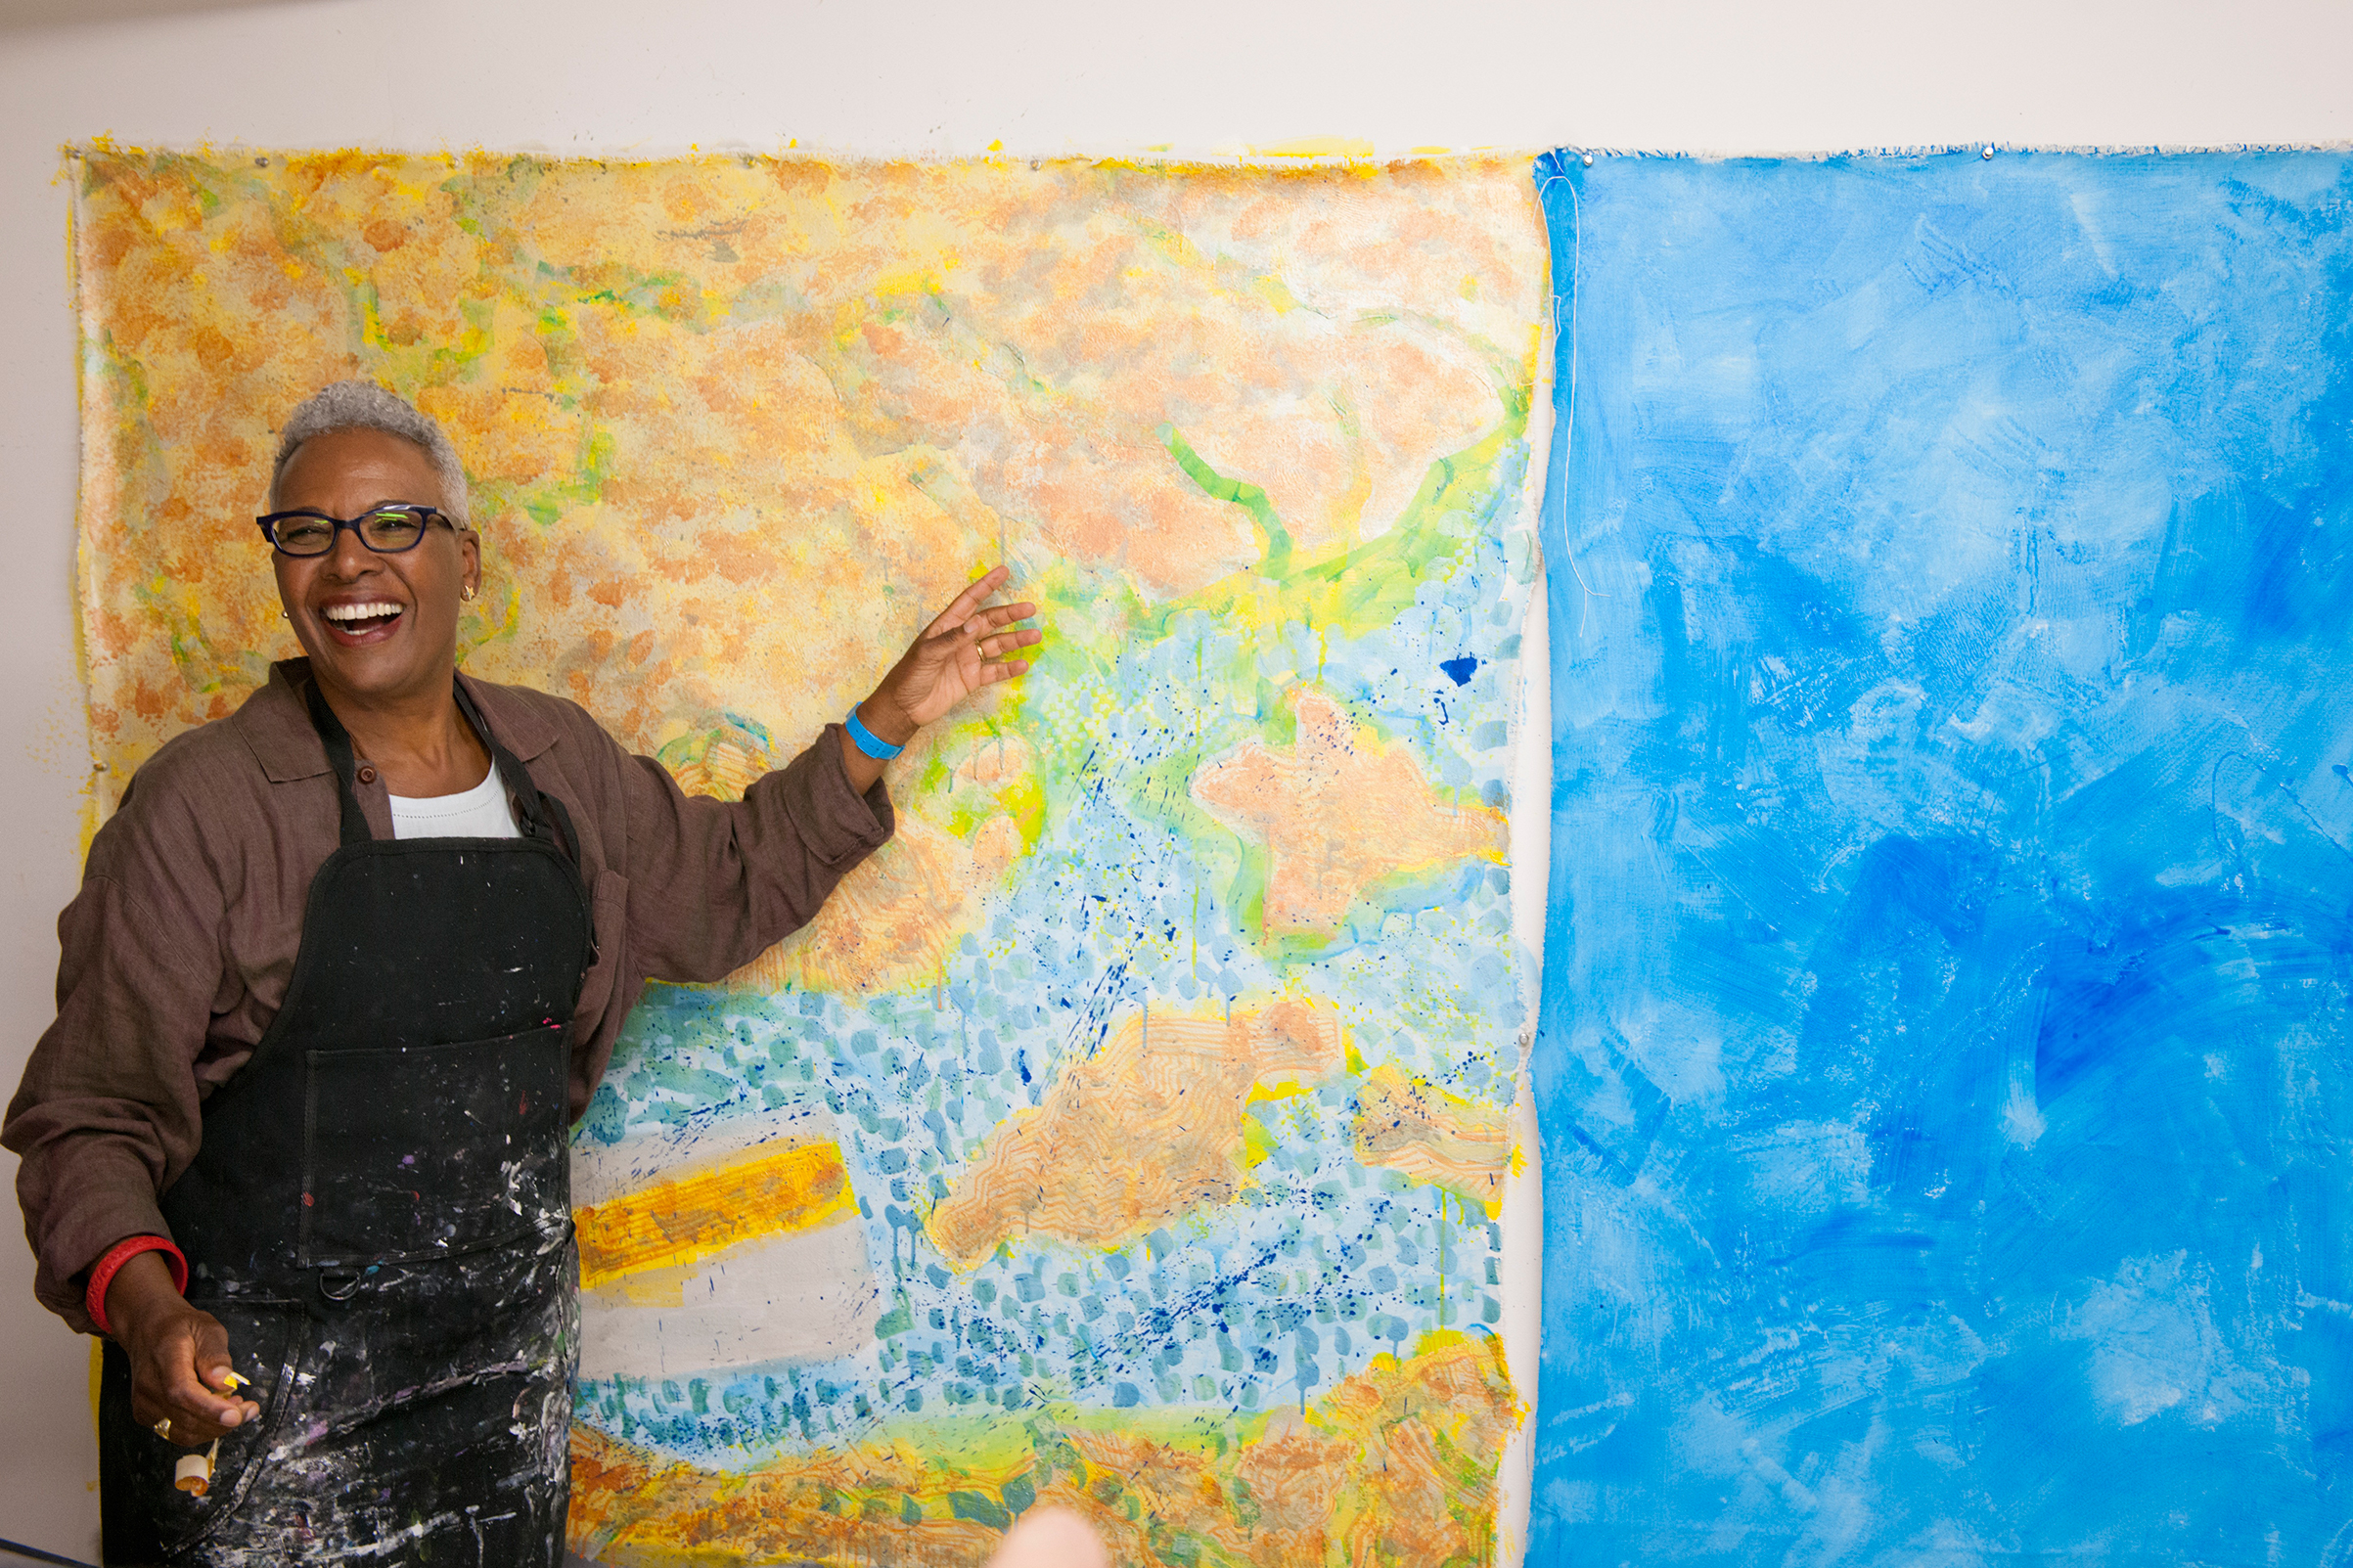 It’s all about process: Painter shows off her progress on the canvas (John Emerson)